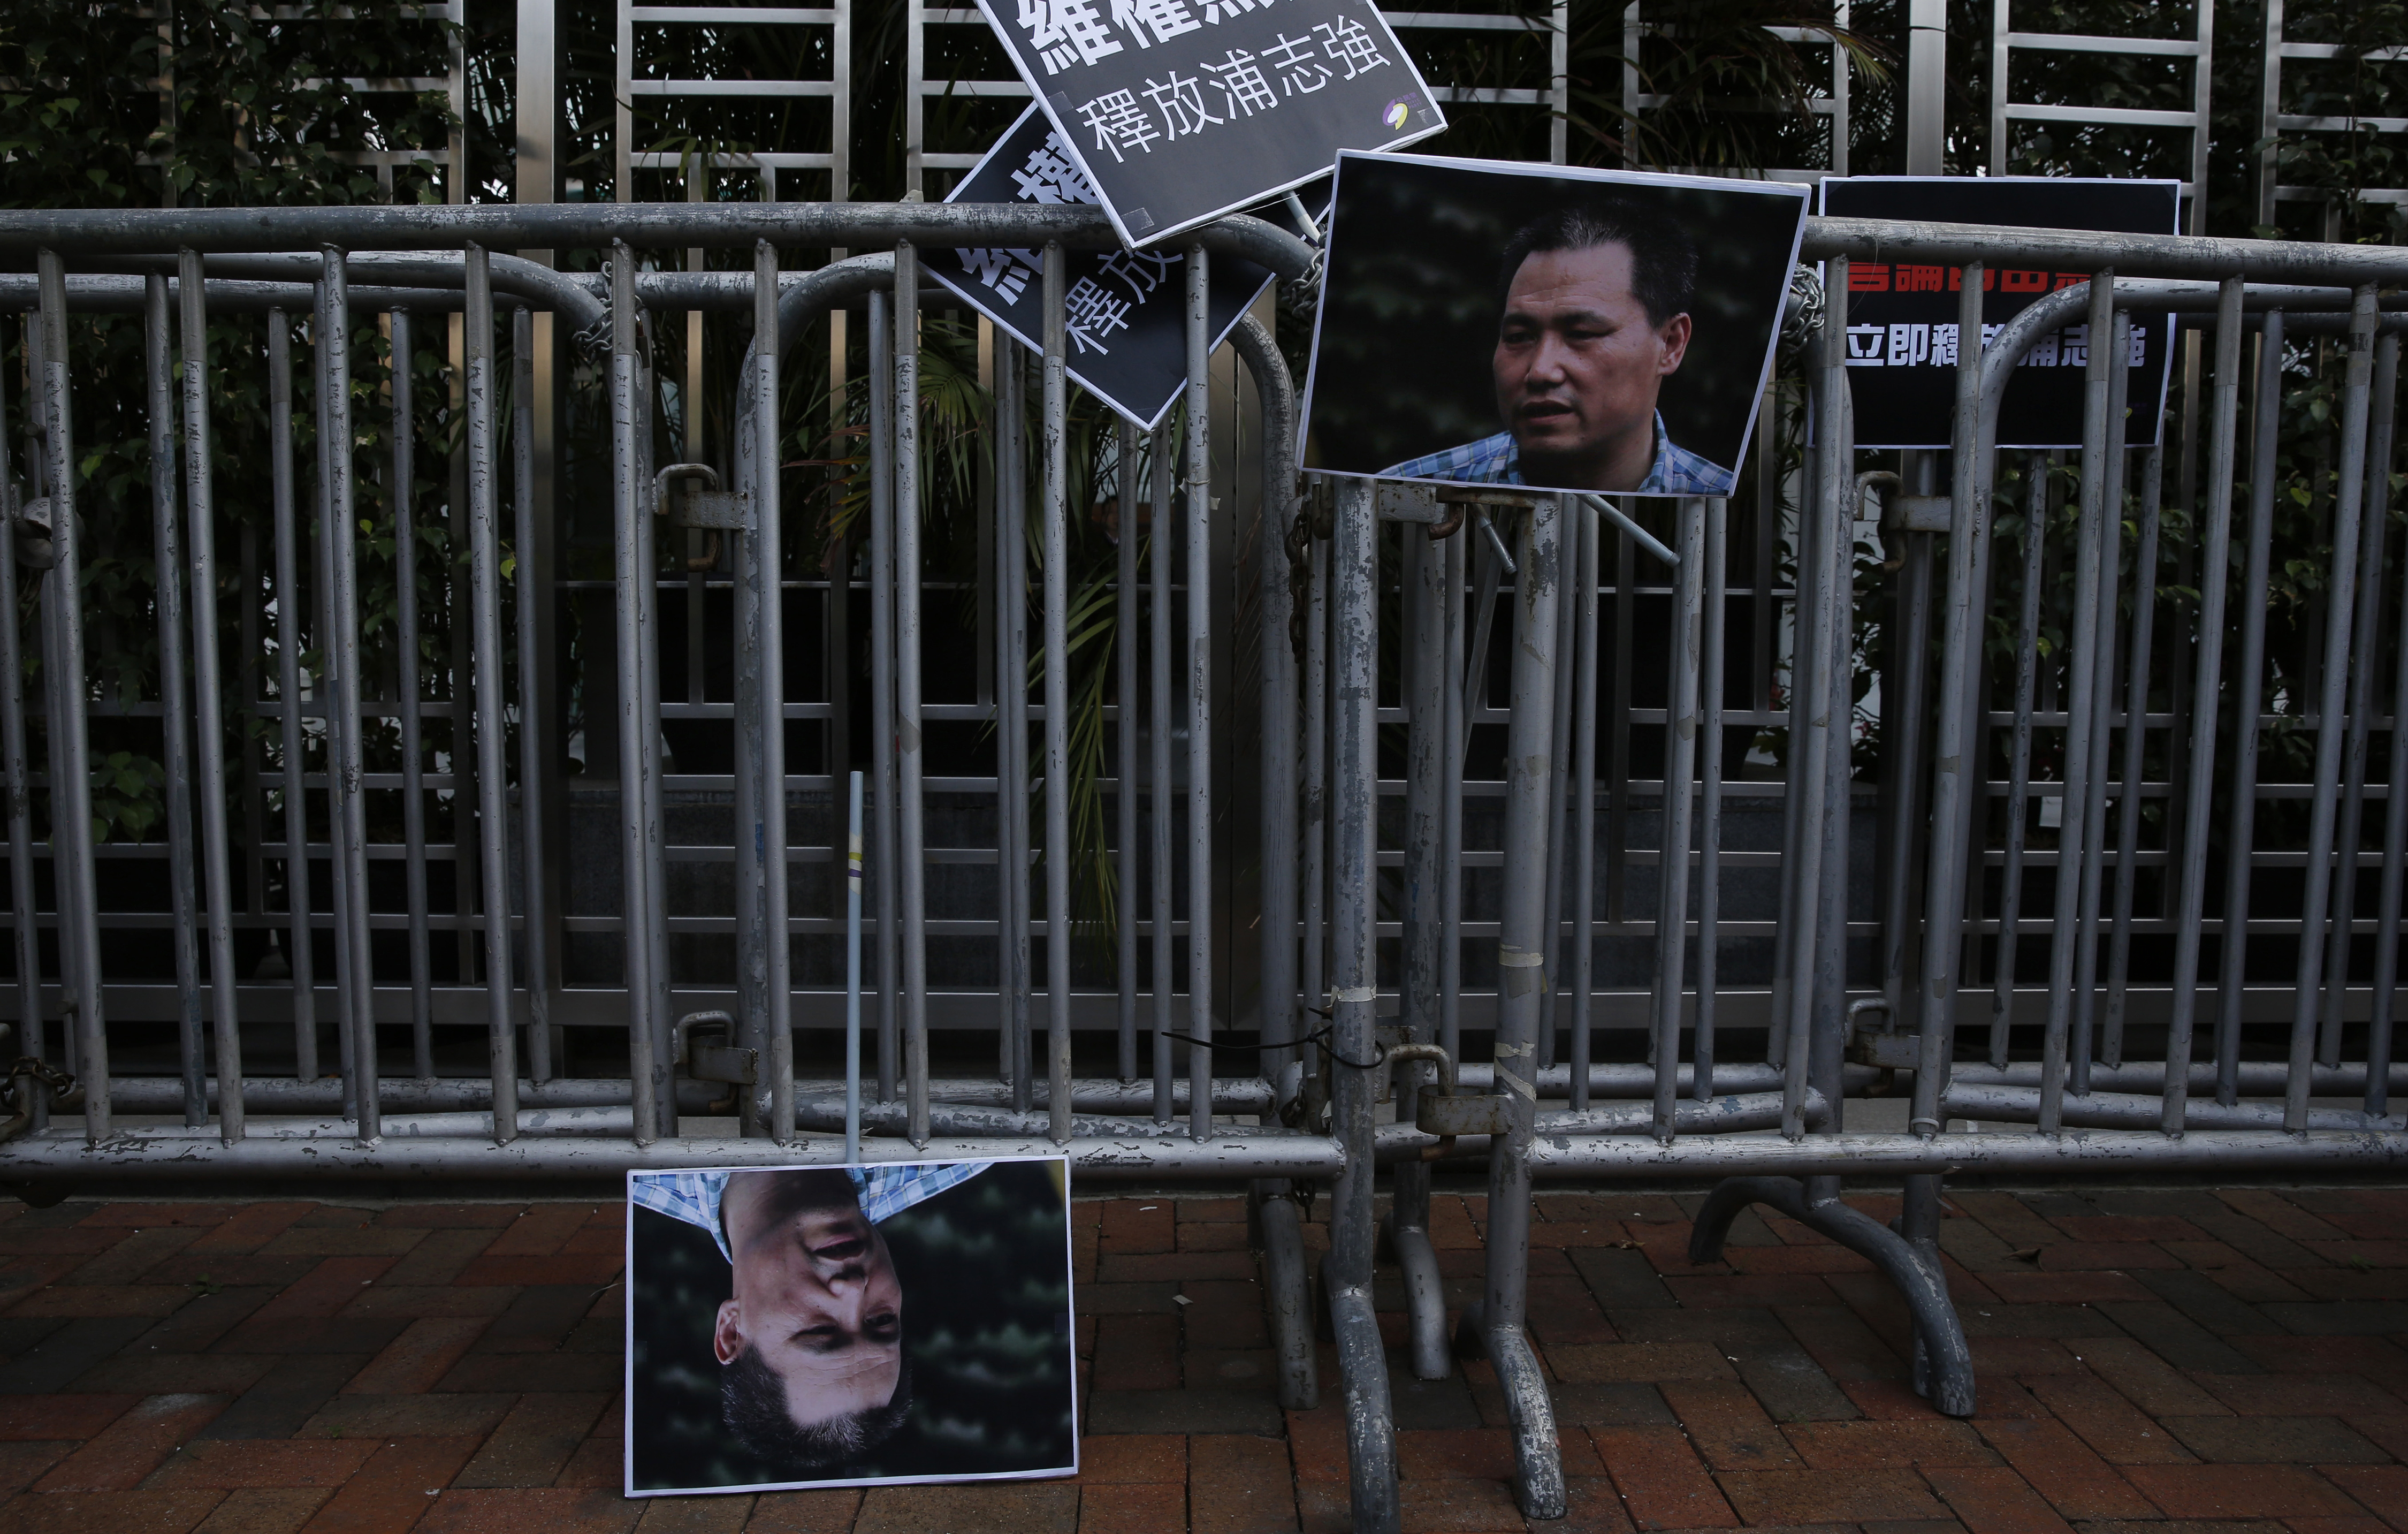 Pictures of human rights lawyer Pu Zhiqiang are displayed by anti-Beijing protesters, outside the Chinese liaison office to demand Pu's release, in Hong Kong, Tuesday, Dec. 15, 2015. Pu, a prominent rights lawyer stood trial on charges of provoking trouble and stirring ethnic hatred with online commentary critical of the ruling Communist Party at a Beijing court on Monday. Placards read "Release Pu Zhiqiang." (AP Photo/Kin Cheung)